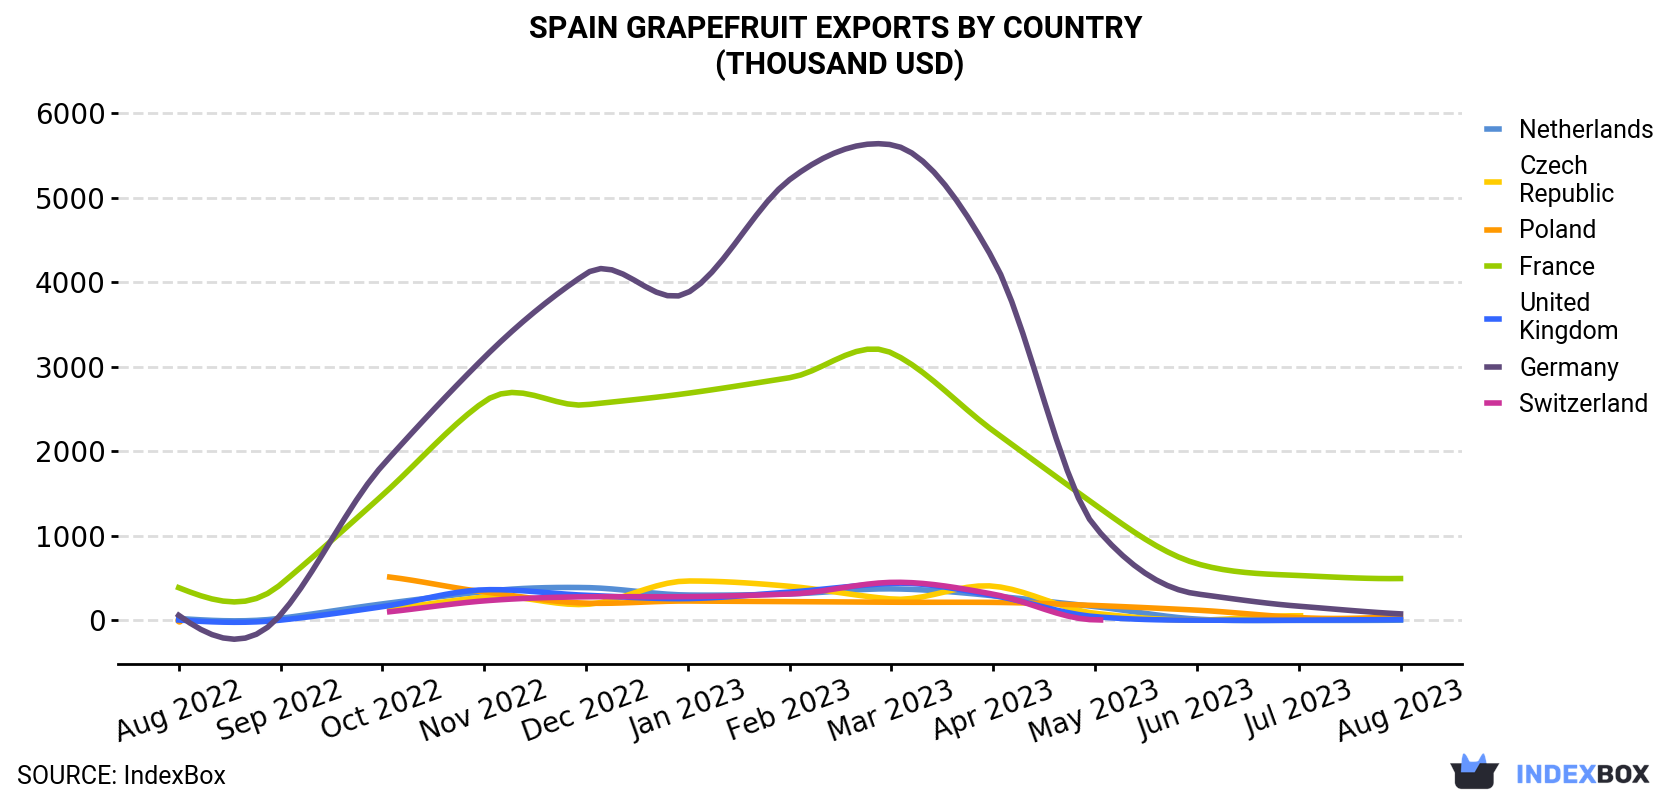 Spain Grapefruit Exports By Country (Thousand USD)